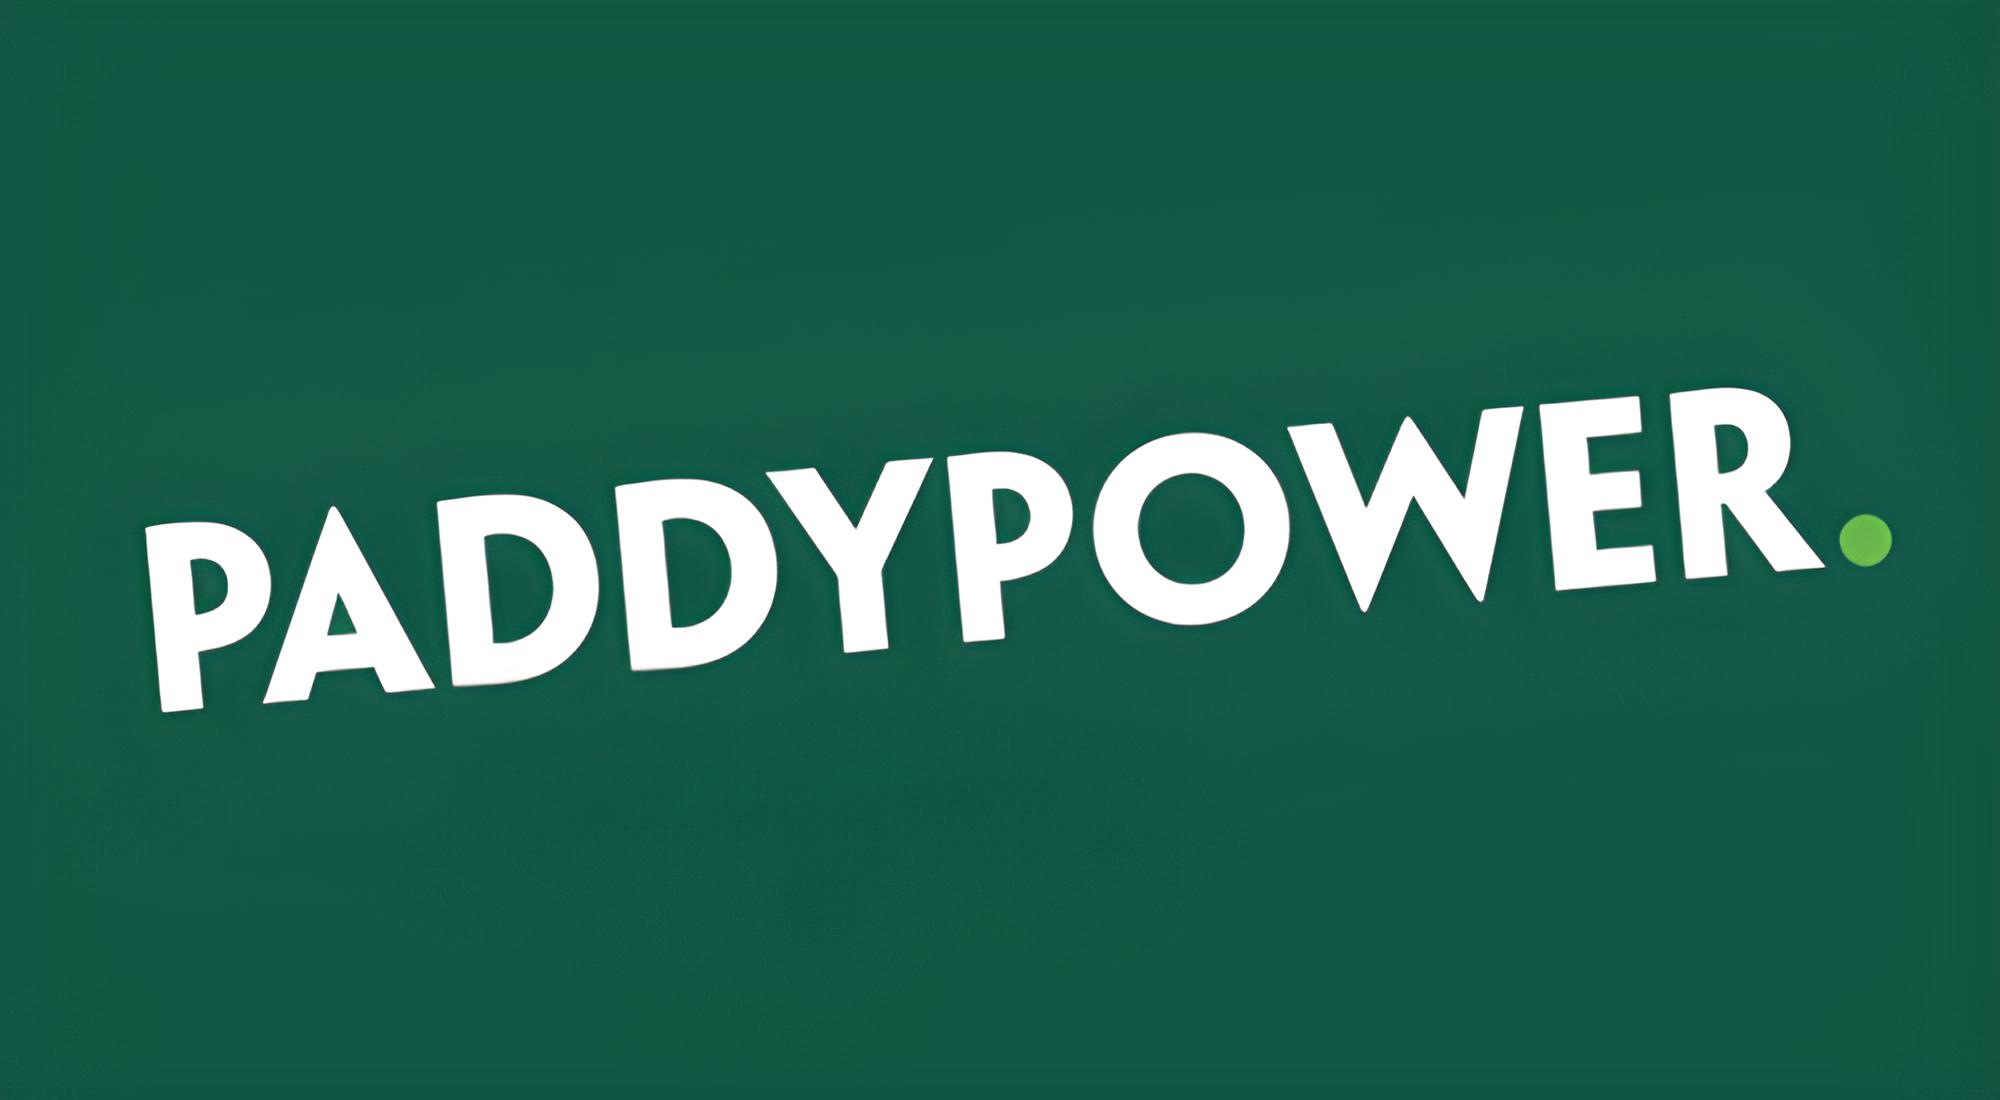 Get 30/1 on a Goal to be Scored in Liverpool v Chelsea with Paddy Power